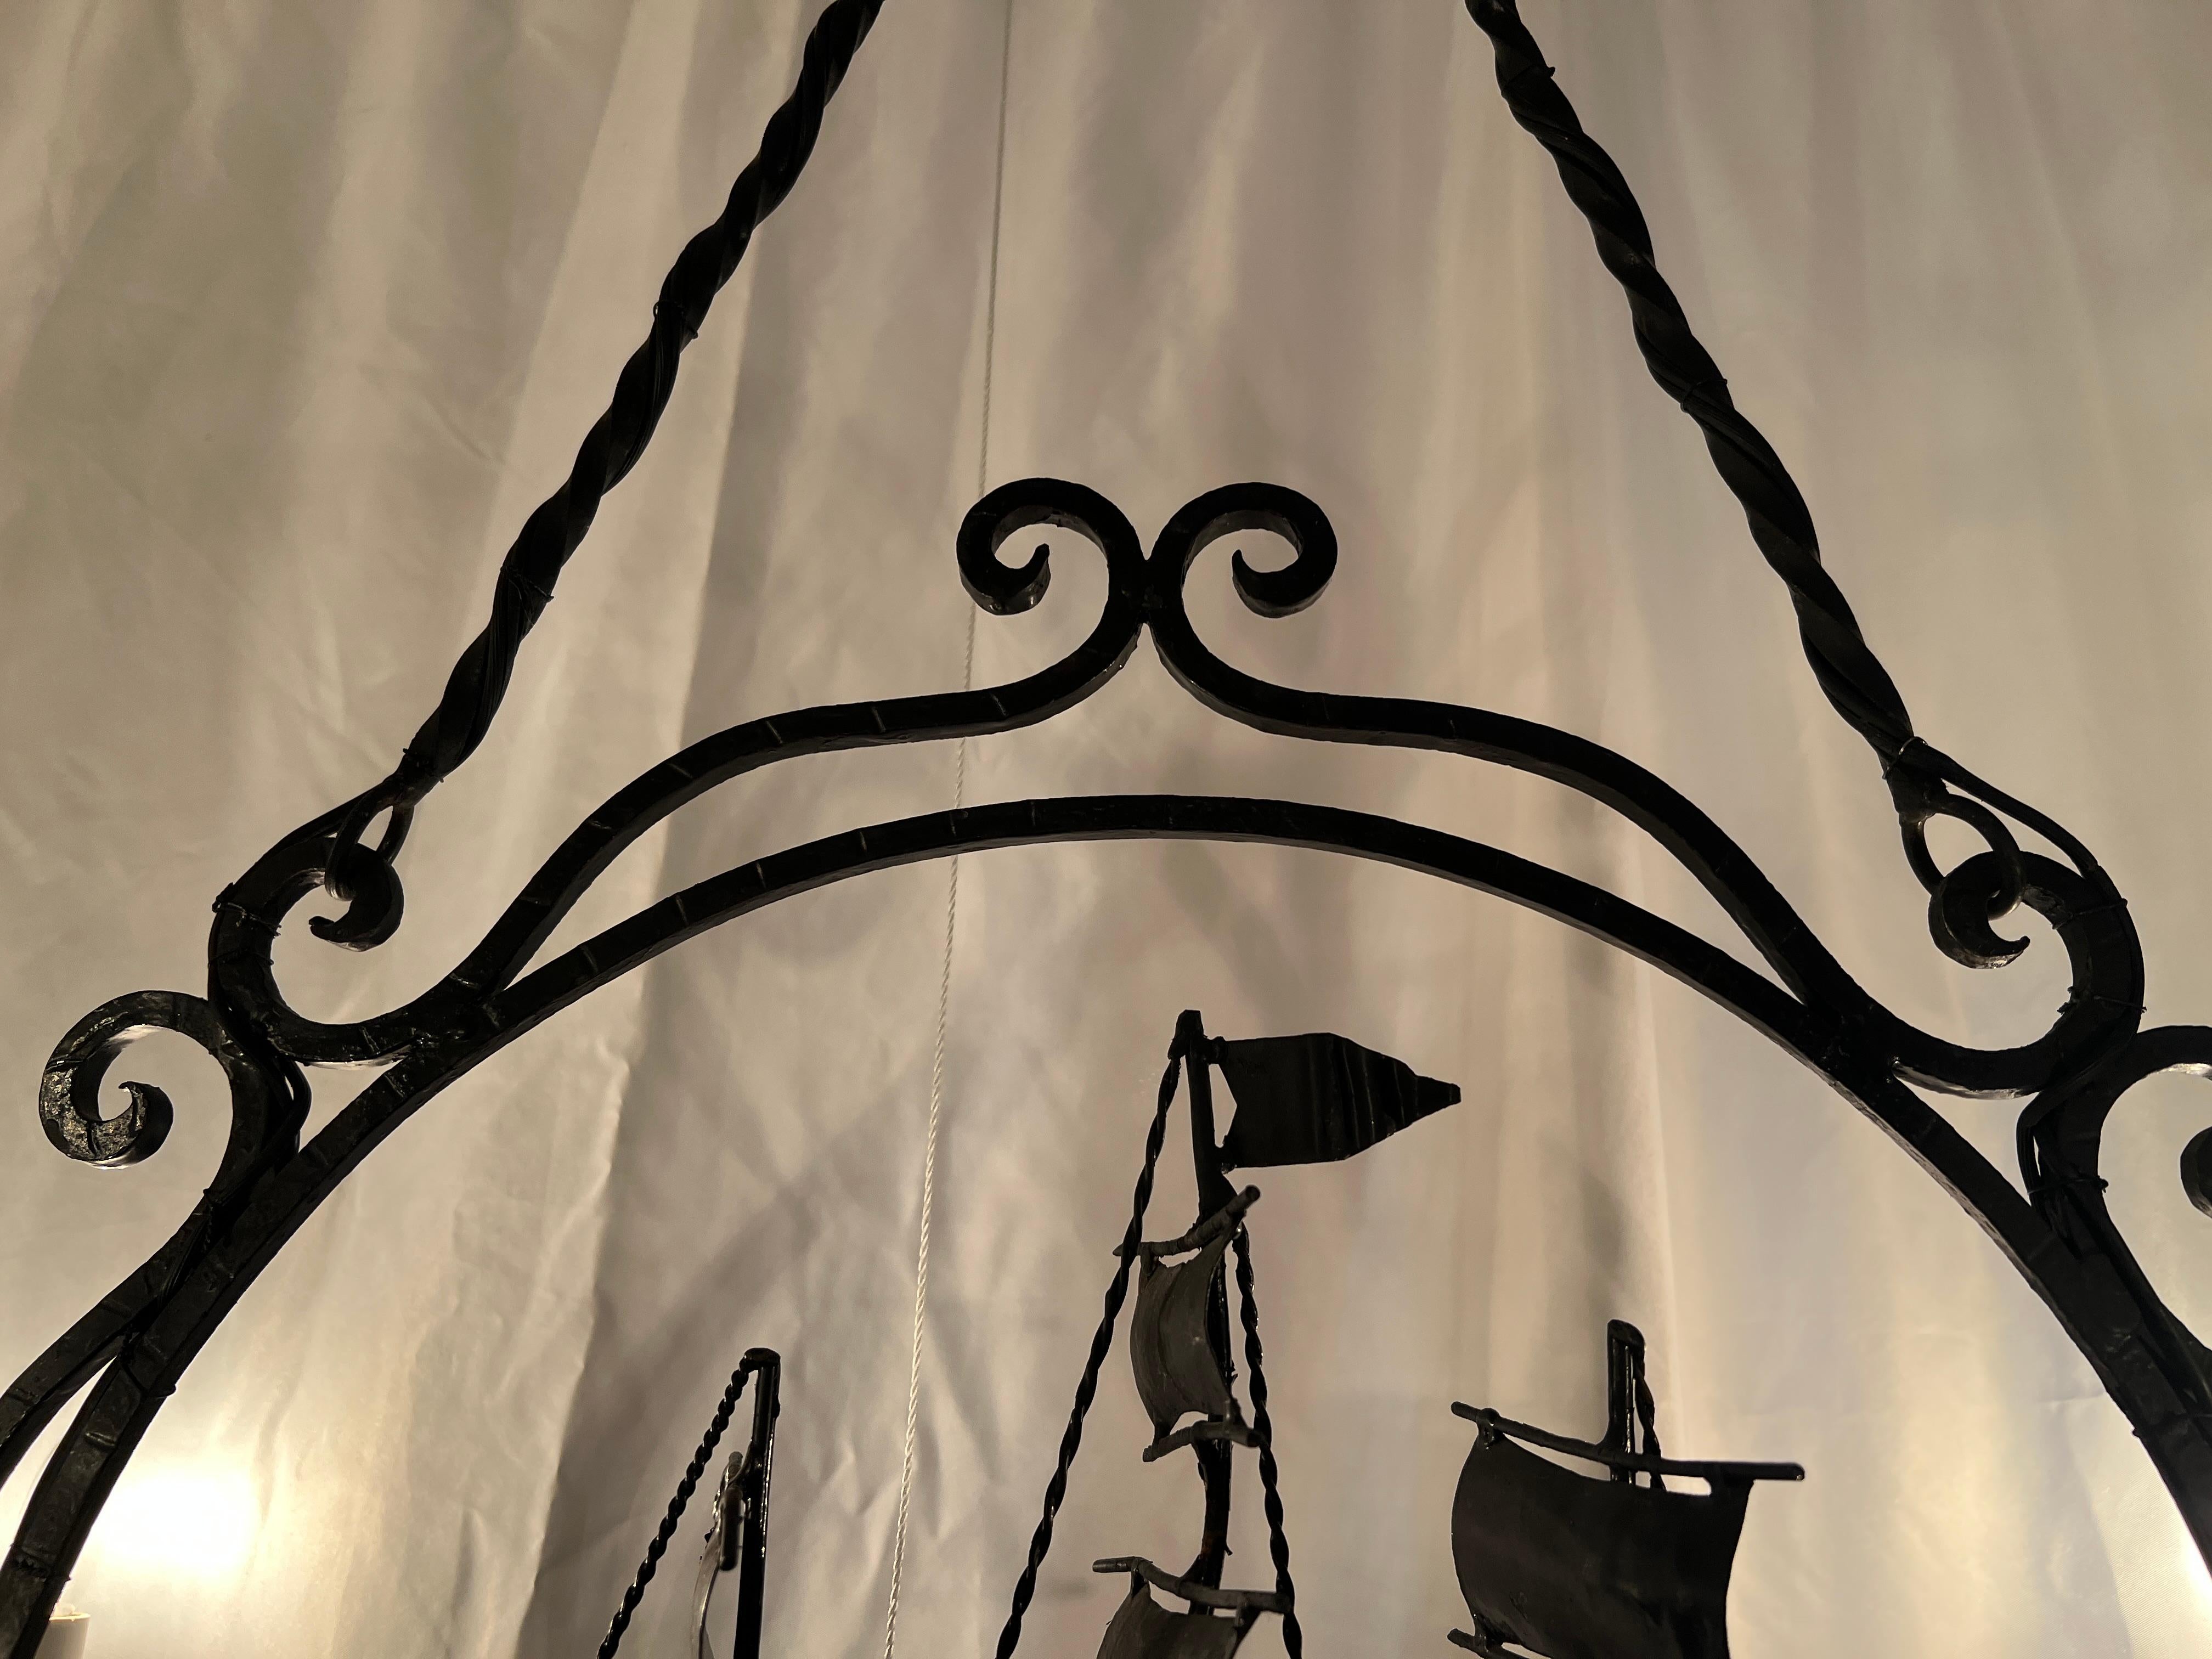 20th Century Estate Wrought Iron Sailing Ship Chandelier, Circa 1930-40. For Sale